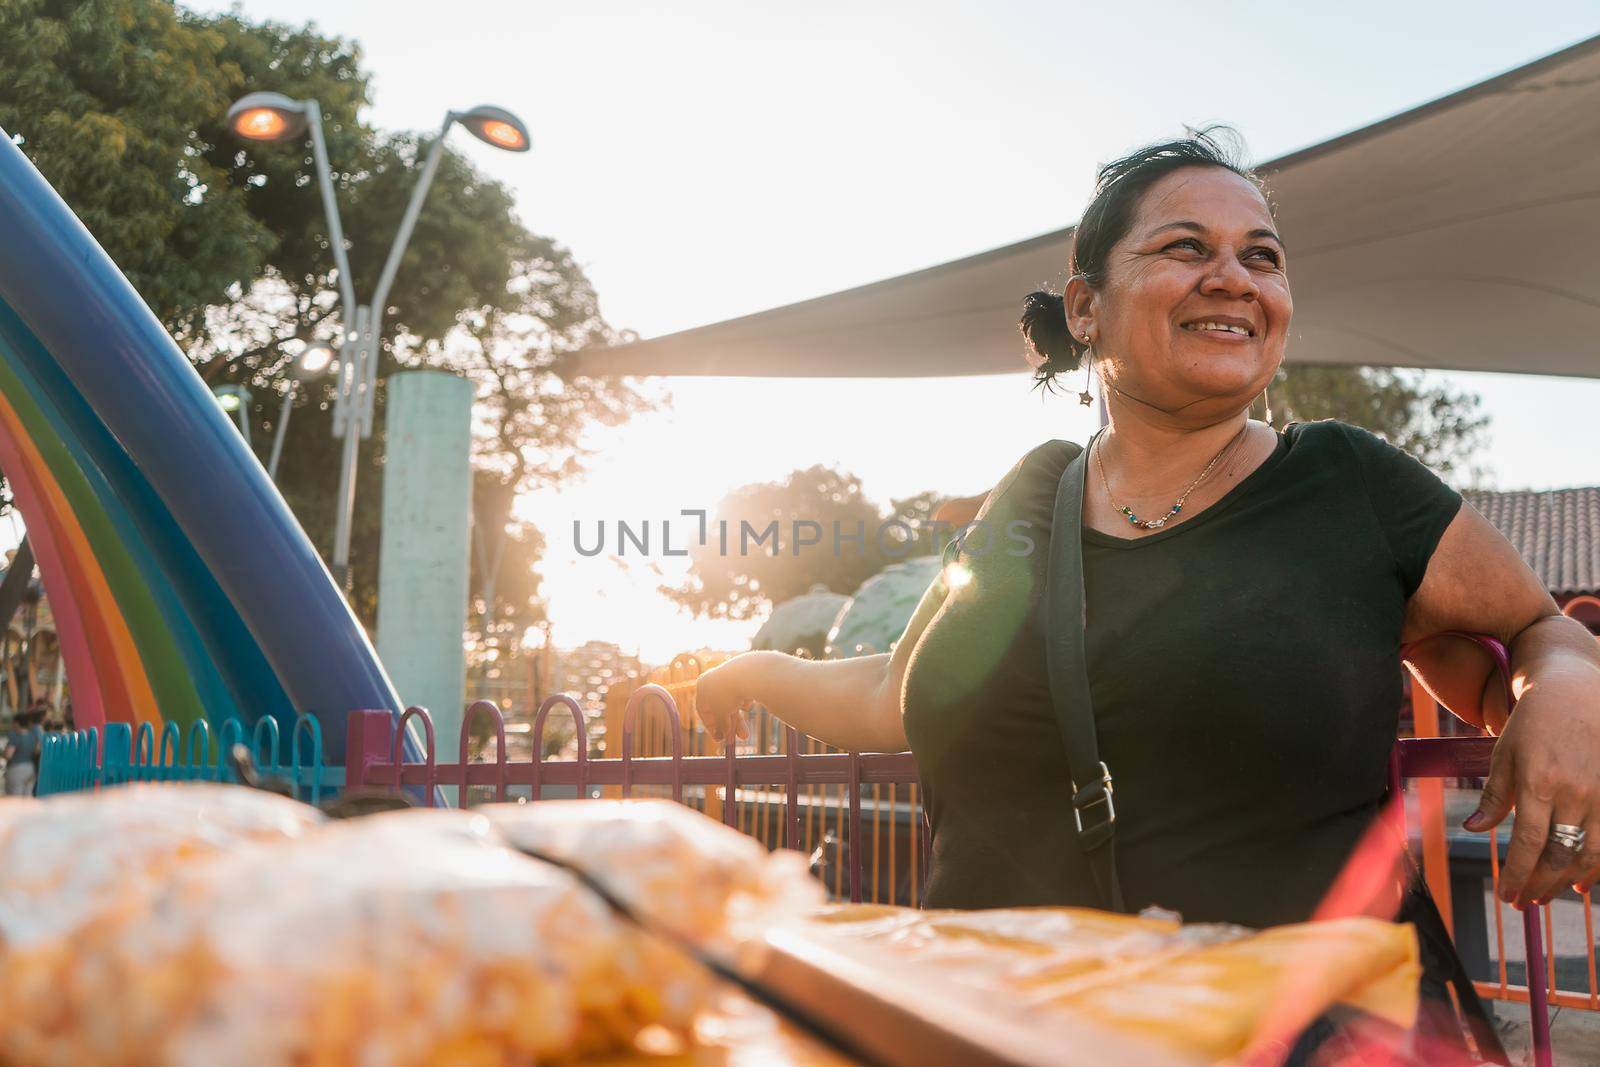 Itinerant fruit vendor in a park in Managua Nicaragua smiling at sunset. Concept of self-employment by cfalvarez